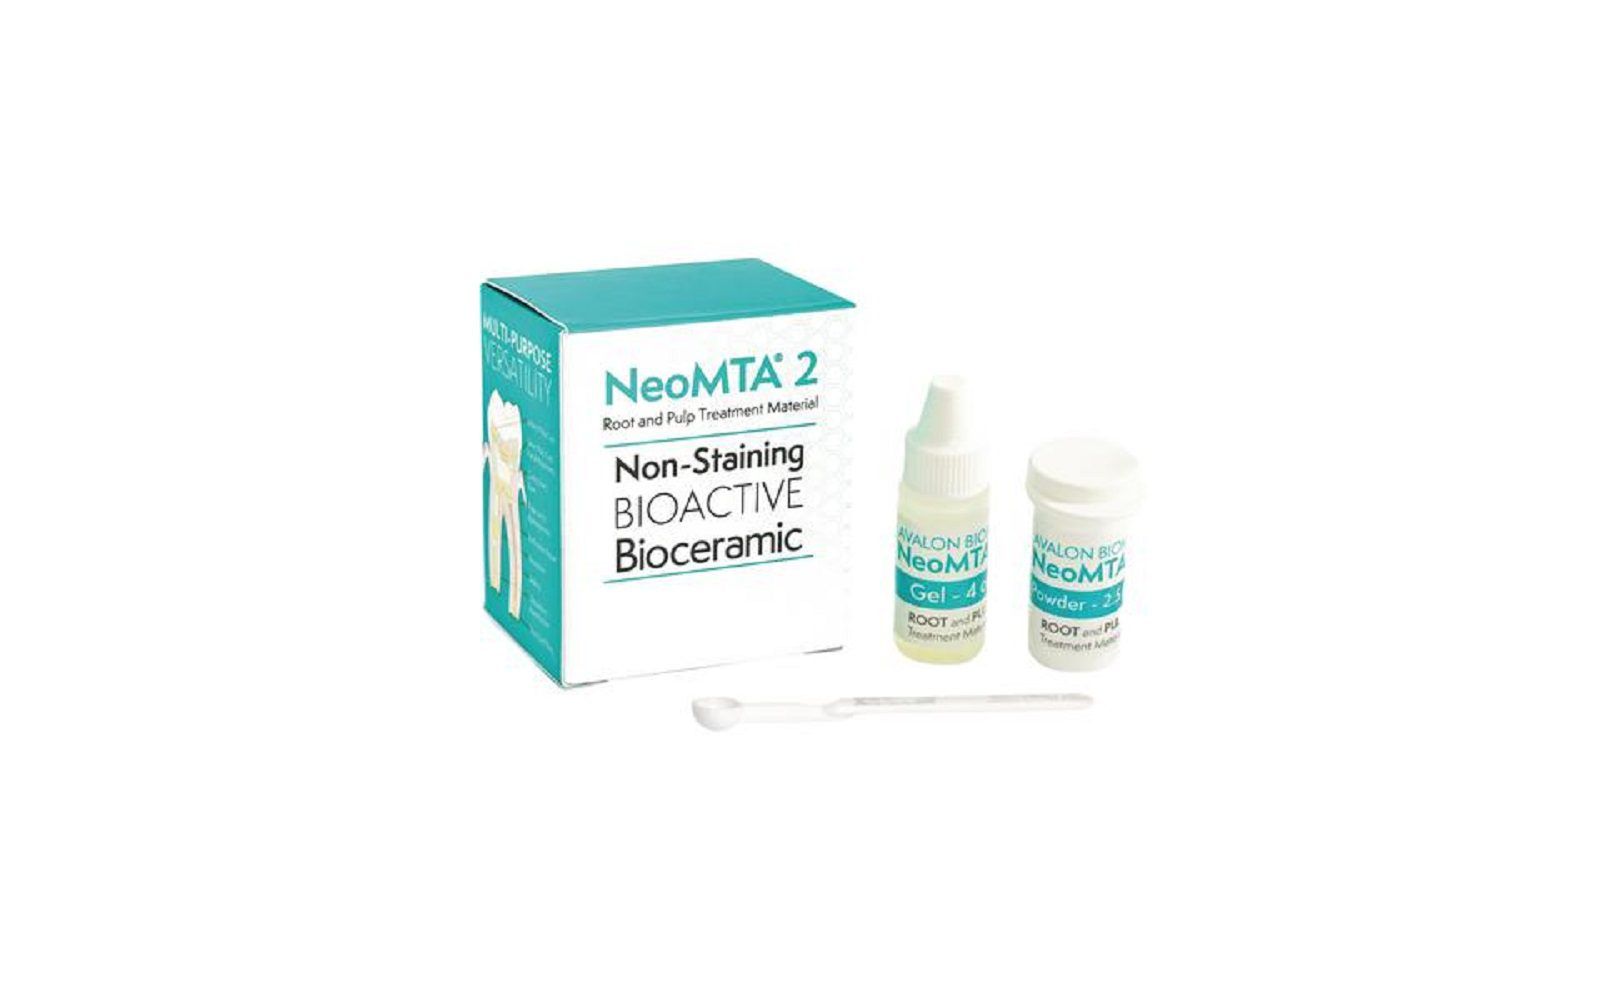 Neomta® 2 professional root and pulp treatment material kit